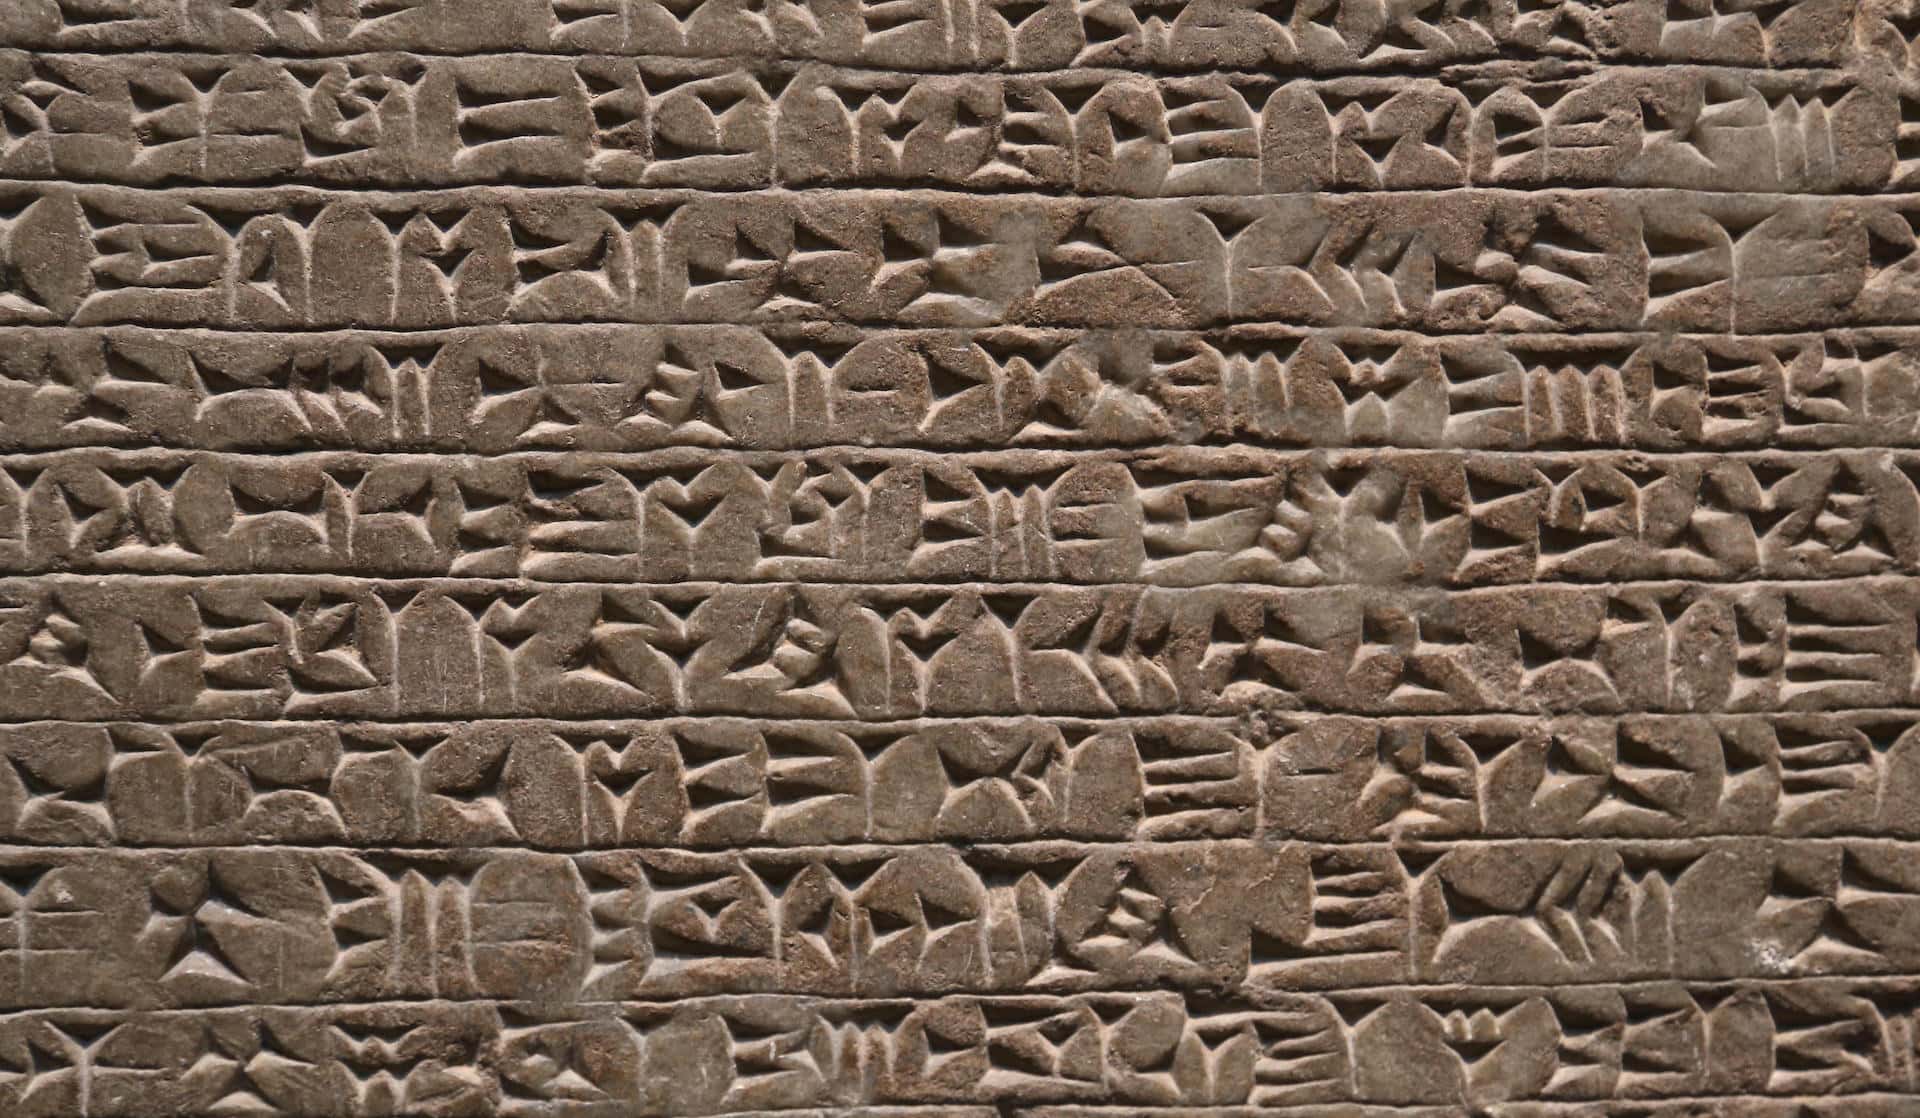 A cuneiform inscription from the 9th century BC, reportedly Neo-Assyrian, found in Northern Mesopotamia.